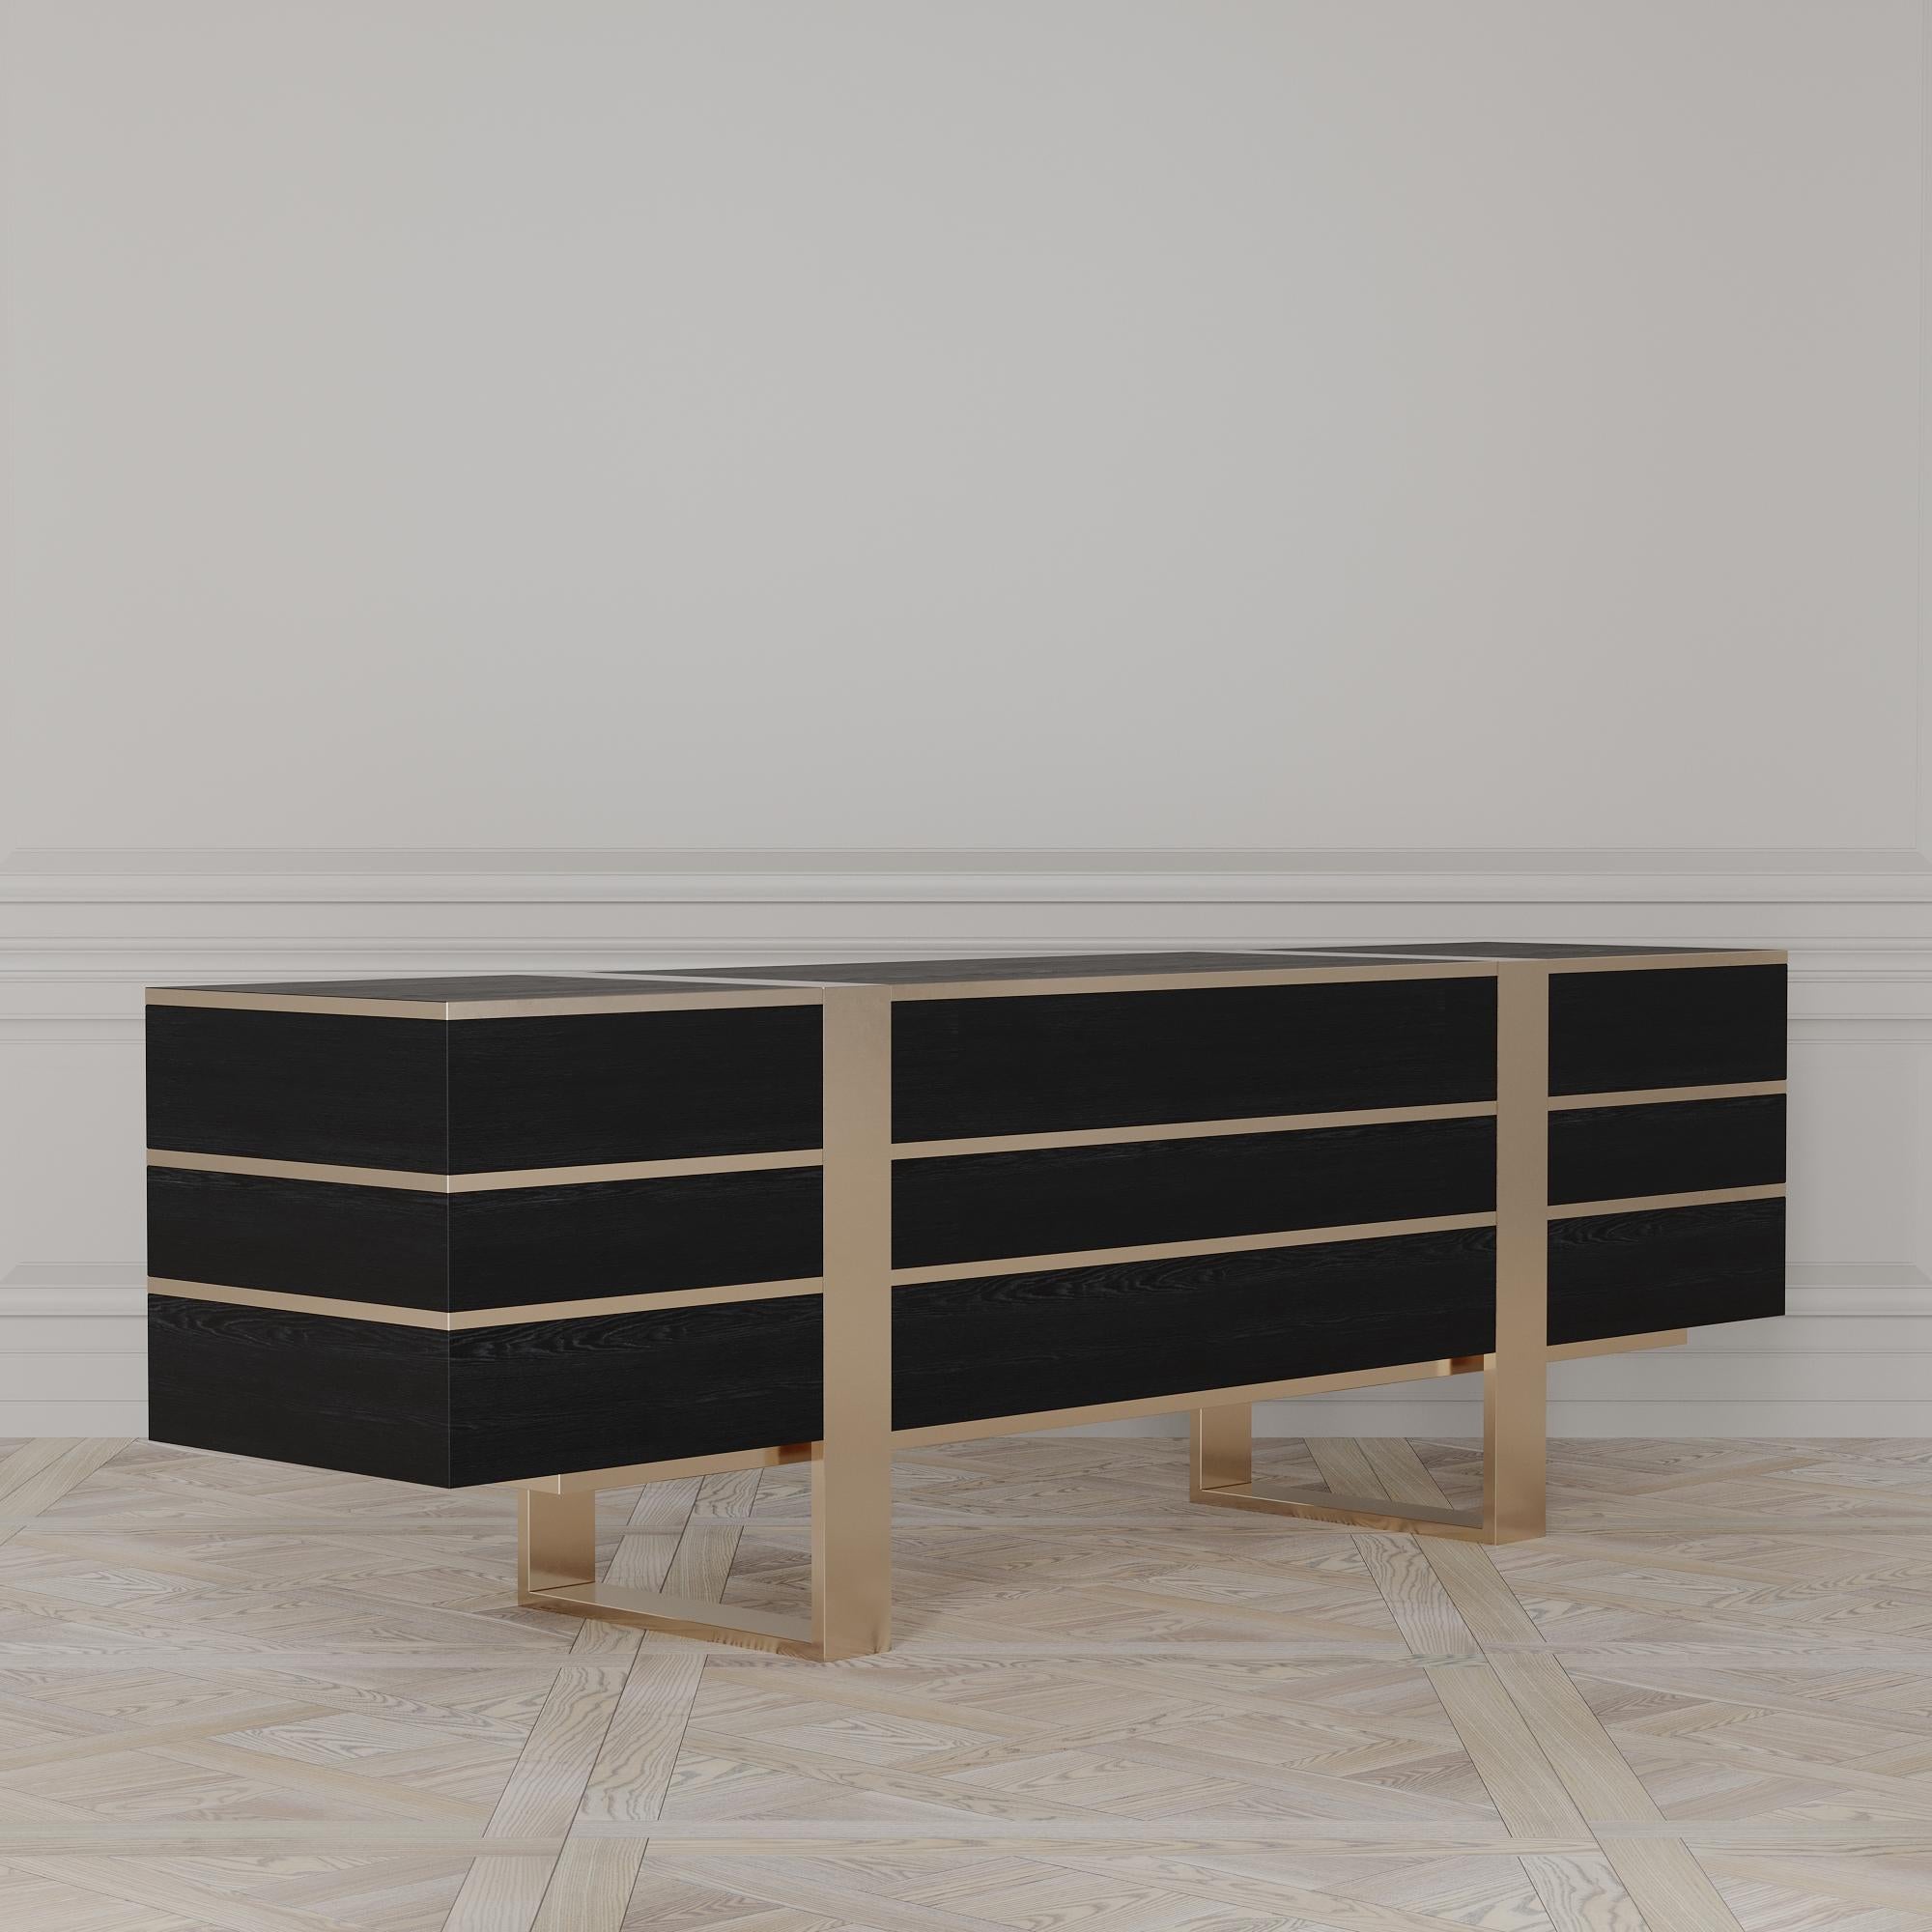 The Eclipse credenza is designed by Emél & Browne in the Minimalist and contemporary style and custom made in Italy by skilled artisans. An Eclipse of light is referenced in the reflective brass inlays, glimpsed against the brushed brown oak. The